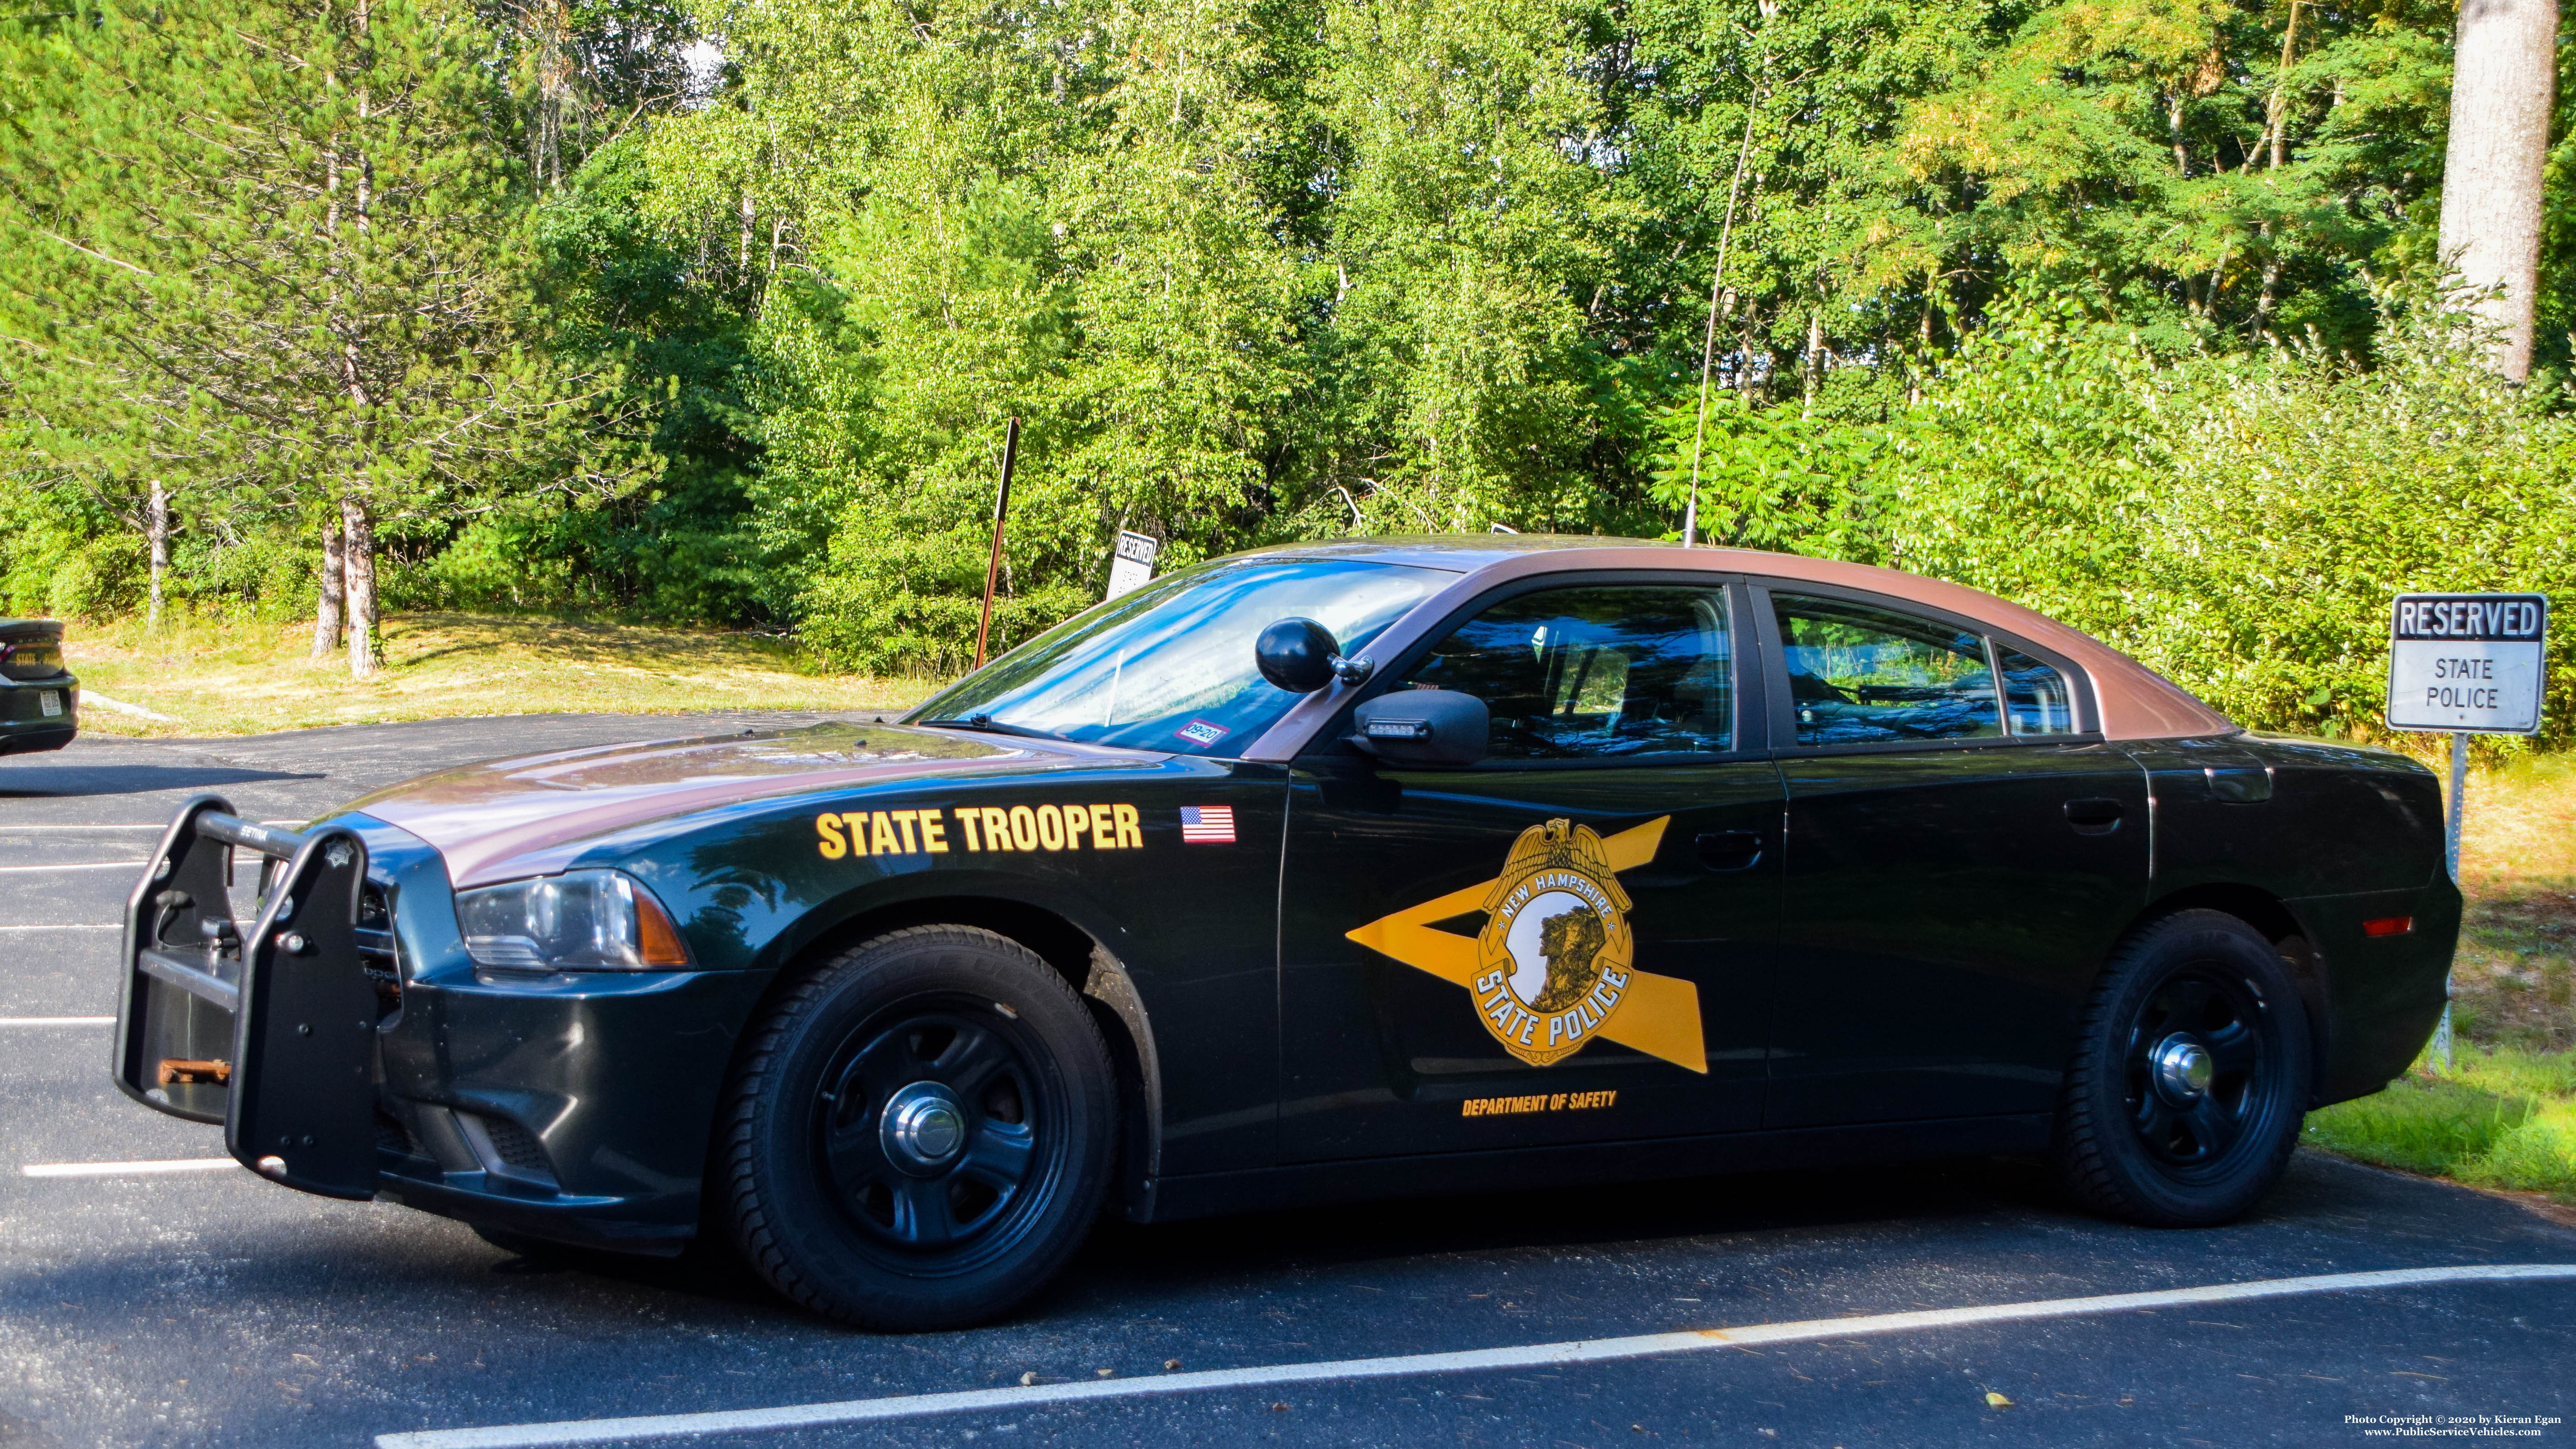 A photo  of New Hampshire State Police
            Cruiser 195, a 2011-2014 Dodge Charger             taken by Kieran Egan